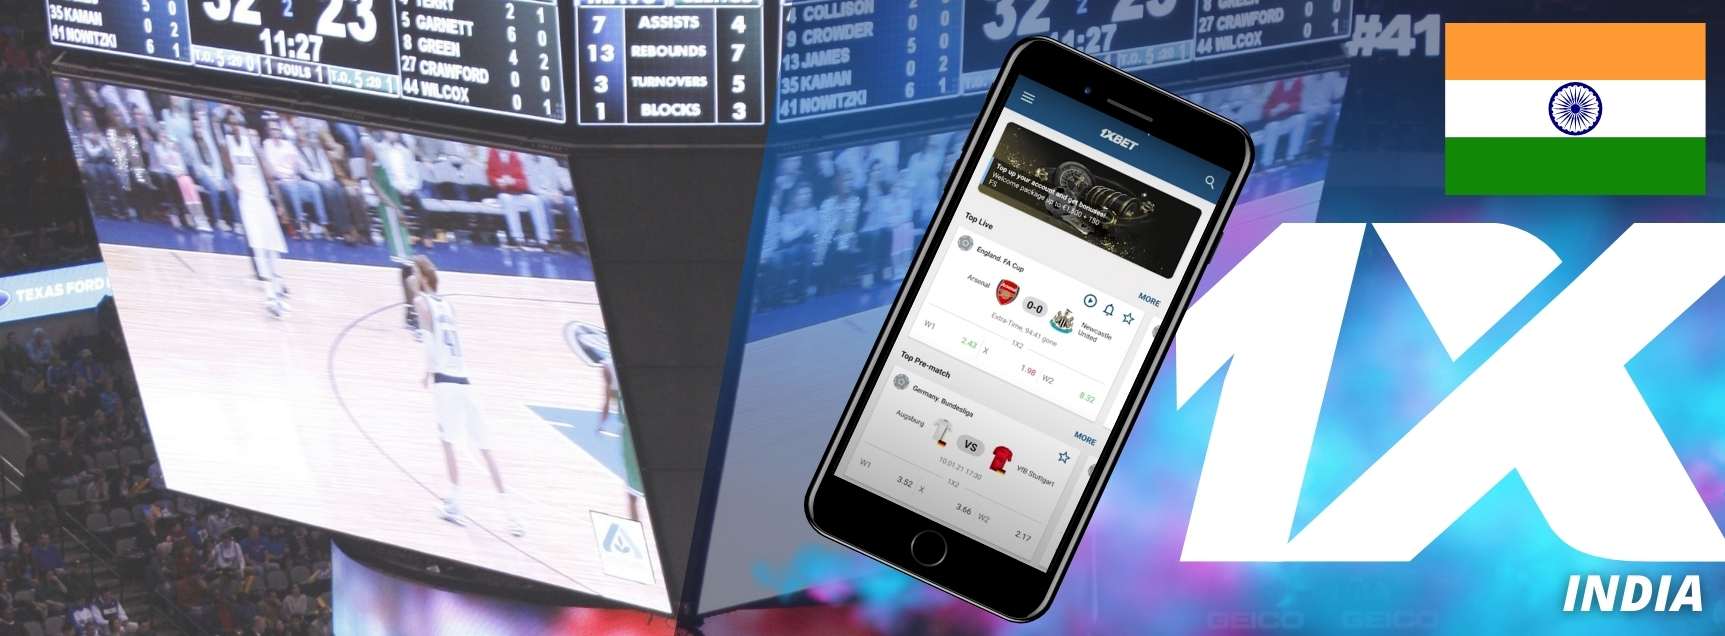 1xbet platform offers a variety of betting options available on the browser